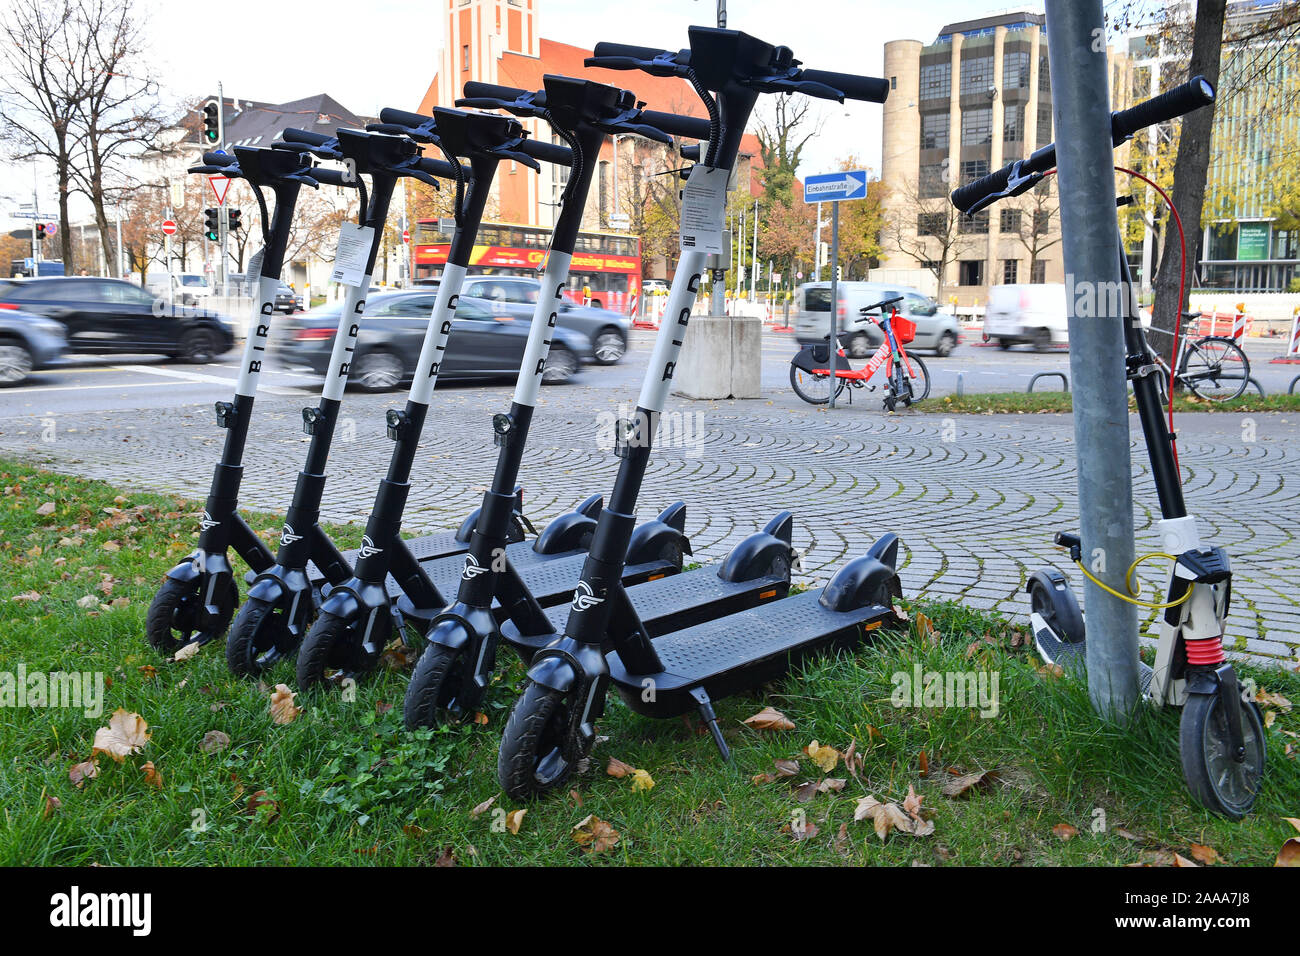 Munich, Deutschland. 19th Nov, 2019. Bird is a scooter rental company based  in Santa Monica, California. It rents electric scooters in several cities  in North America and Europe. E-scooters are arranged side